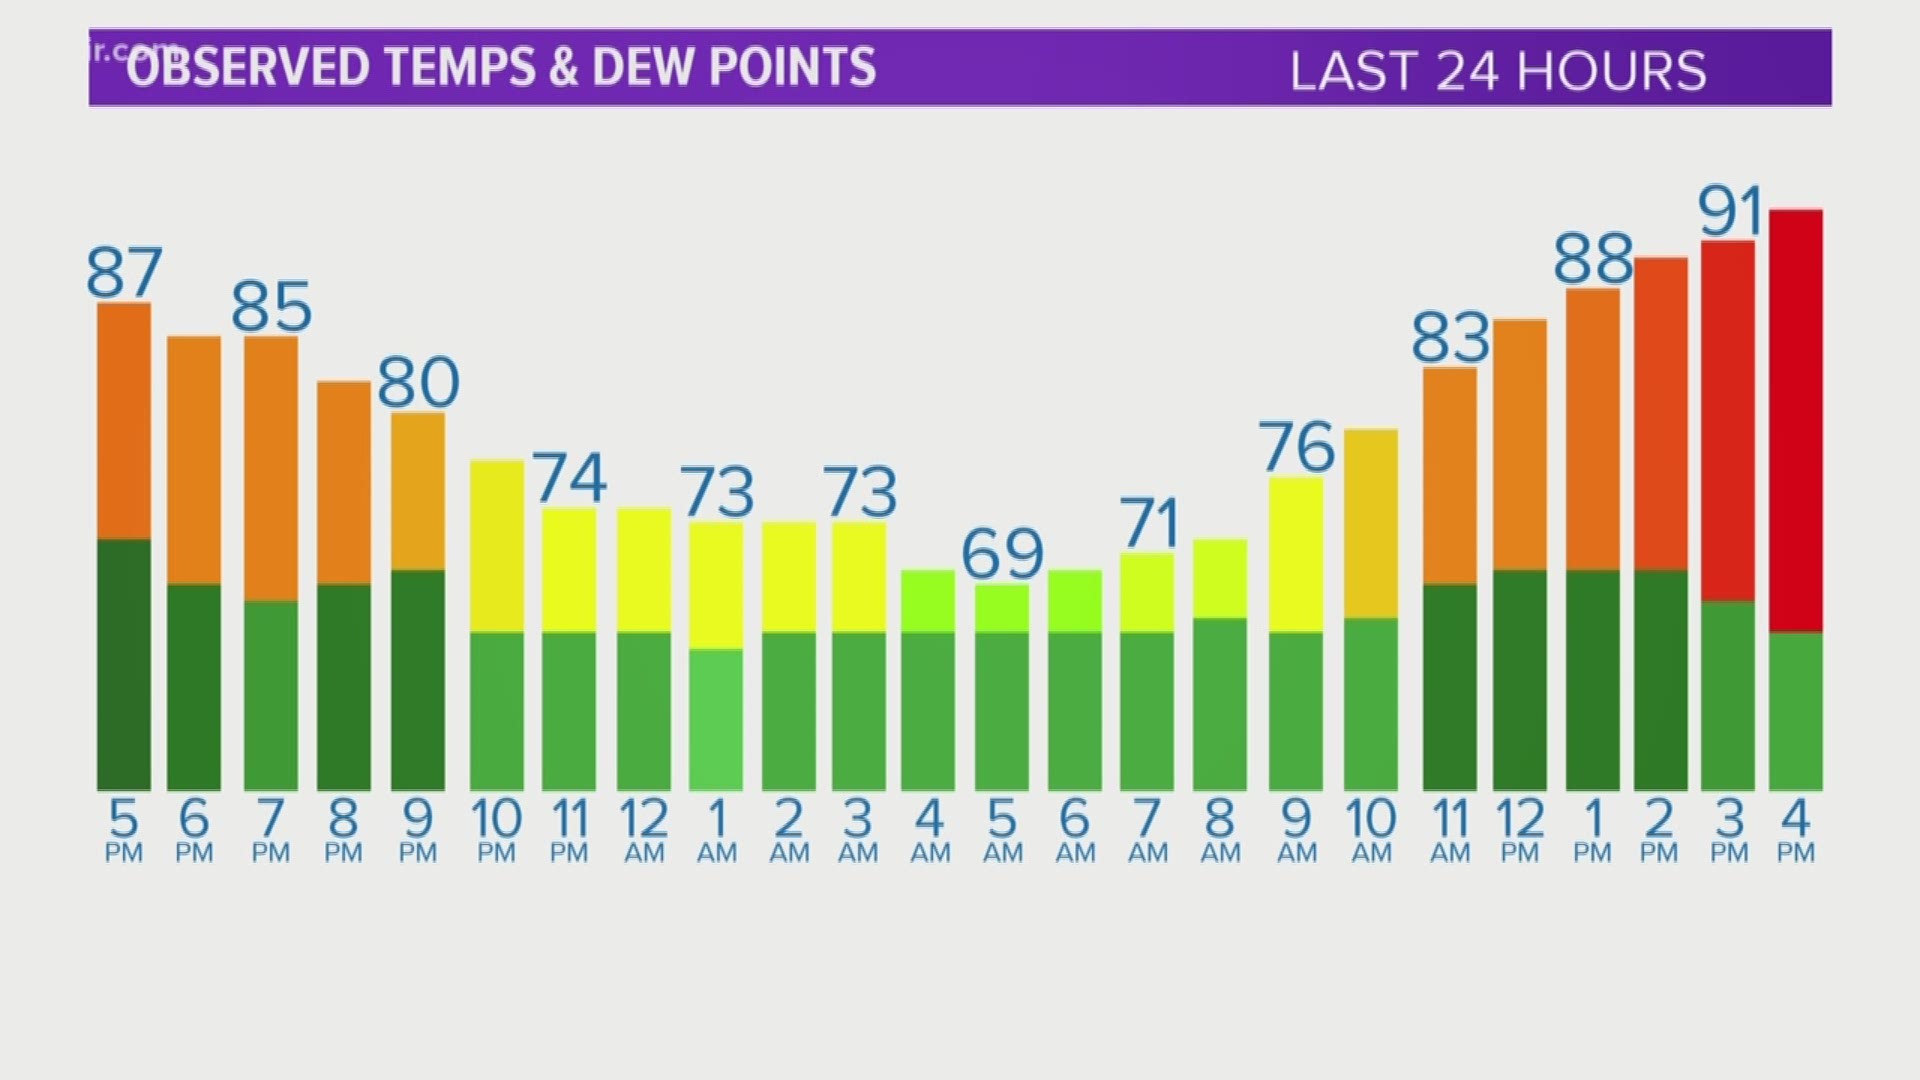 Cassie explains that humidity changes based on the difference between the actual air point temperature and the dew point temperature, so when temperatures lower at night, the relative humidity is higher. June 18, 2018.